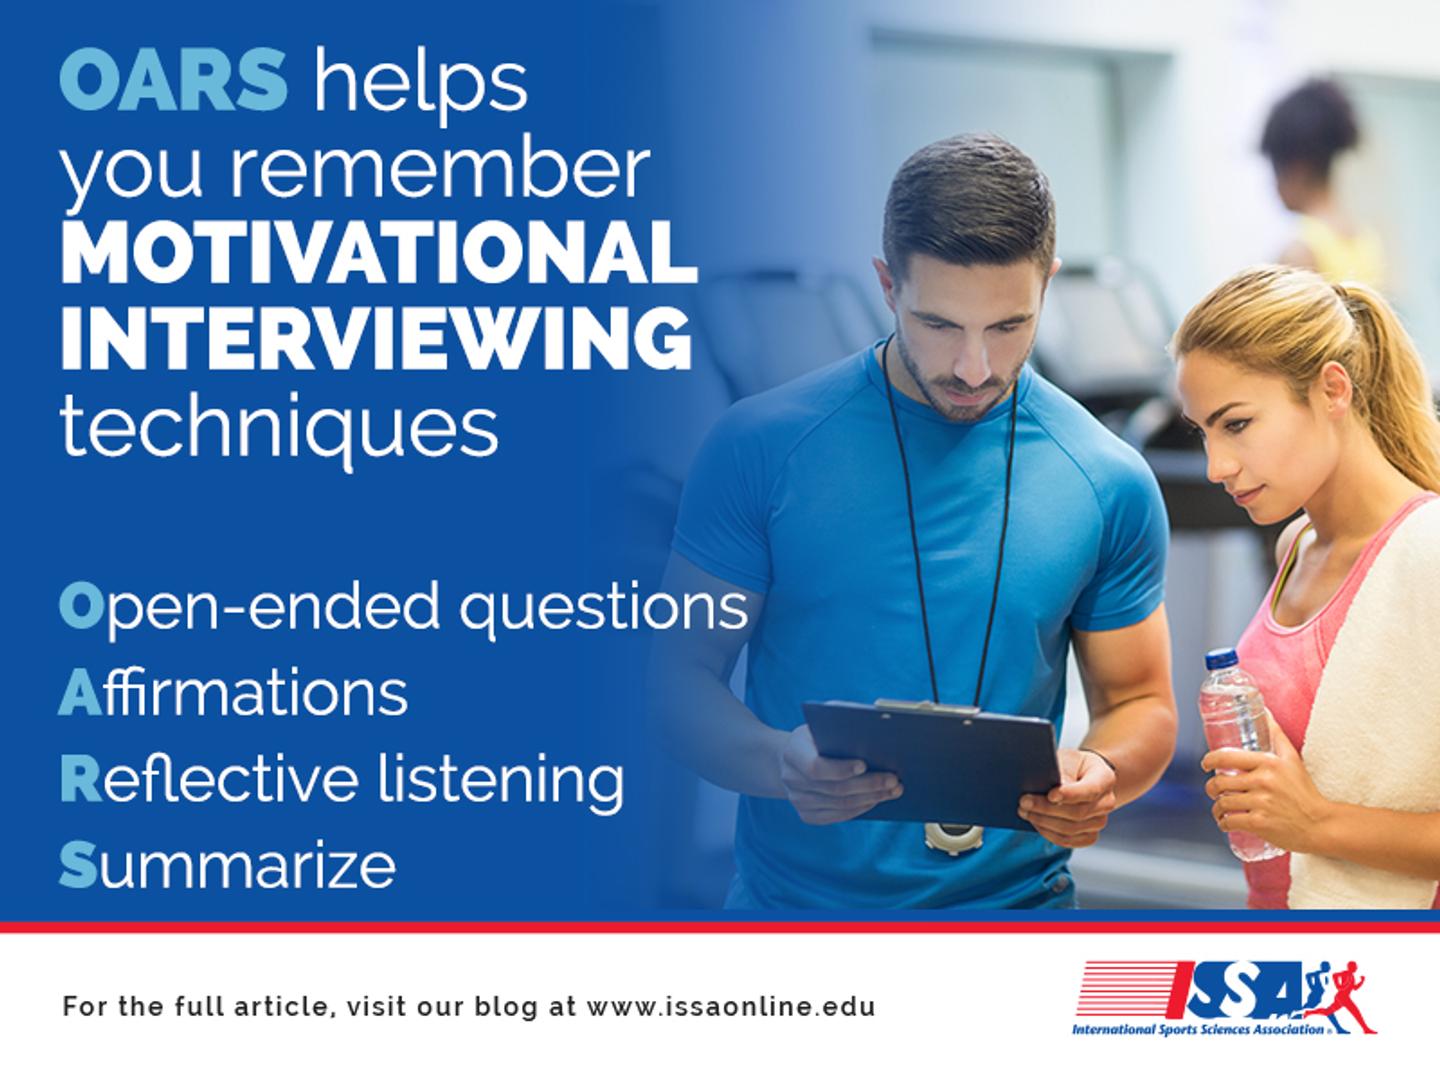 ISSA, International Sports Sciences Association, Certified Personal Trainer, ISSAonline, Mom Fitness, Are you having trouble getting or keeping moms in the gym?, OARS help you remember Motivational Interviewing Techniques